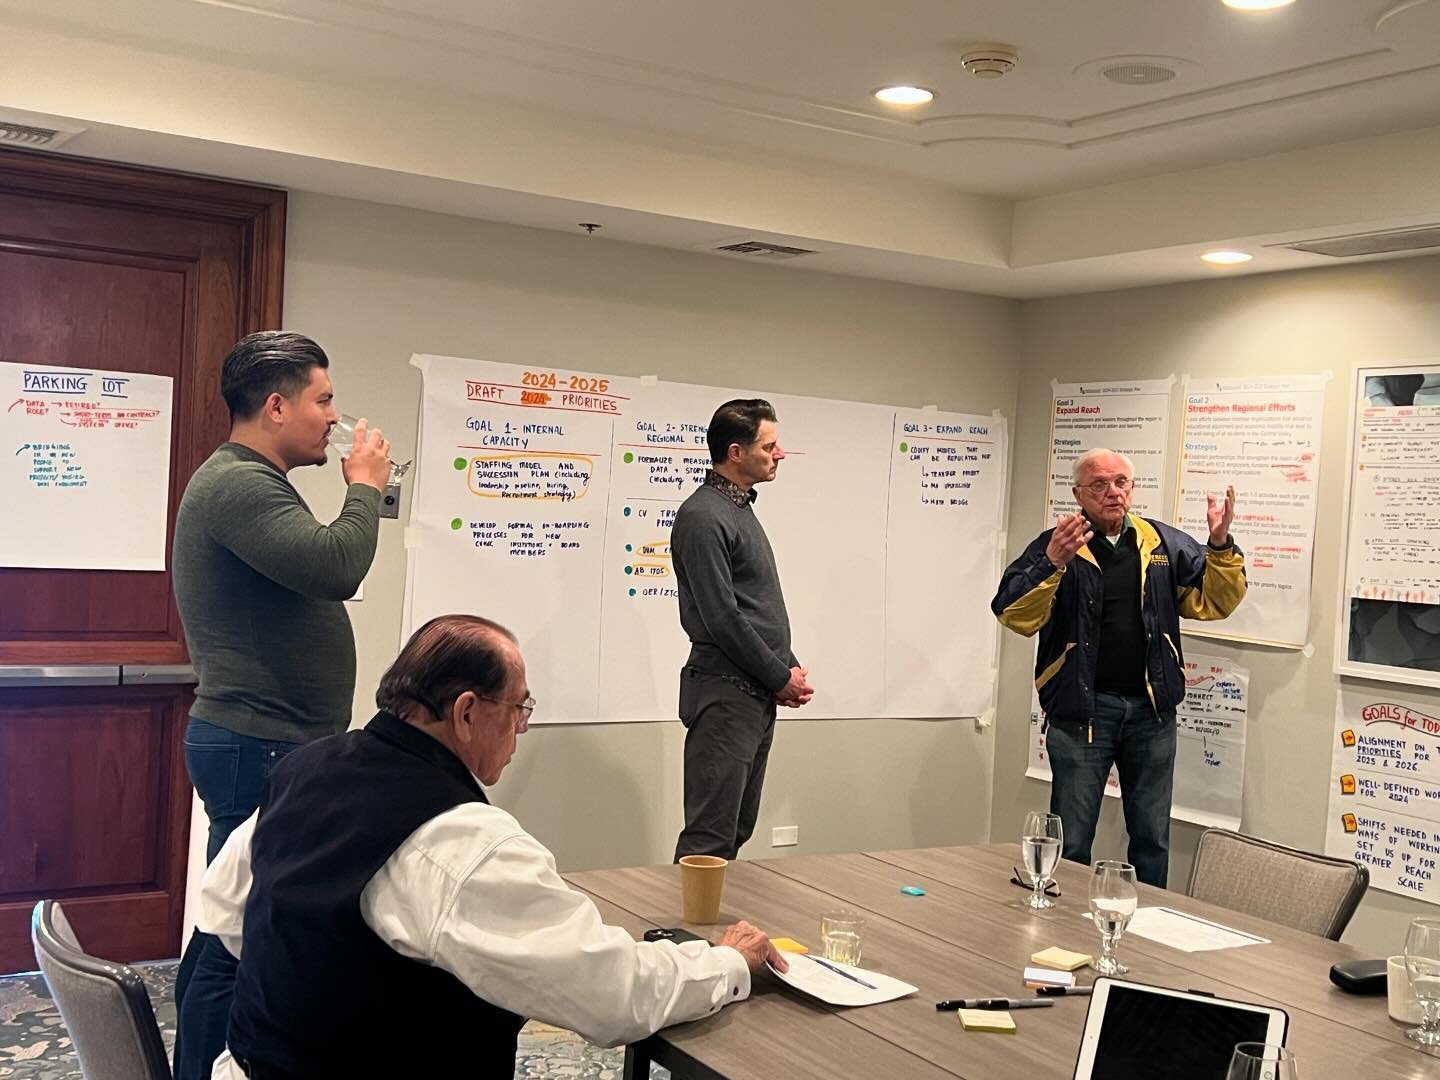 One of our favorite workshops this week was with the incredible team at CVHEC - a higher ed consortium in Central California. What especially inspired me was the team made up of retired educators, now working tirelessly to improve educational outcome